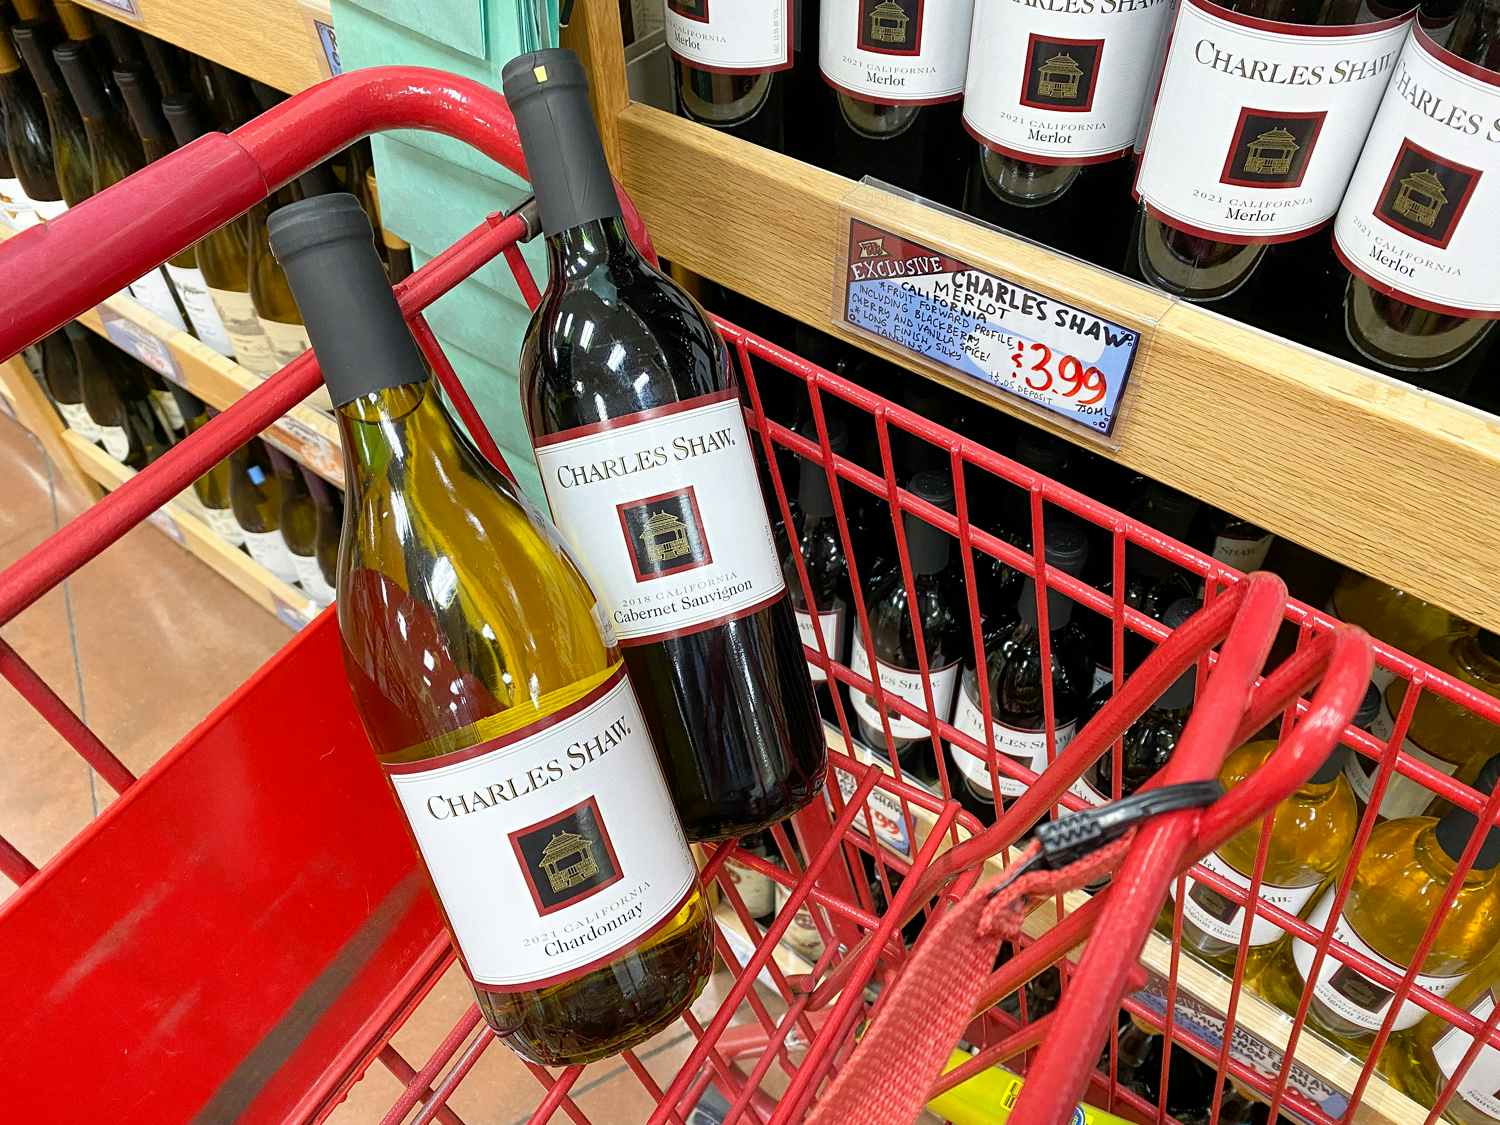 charles shaw two-buck chuck wine bottles in cart